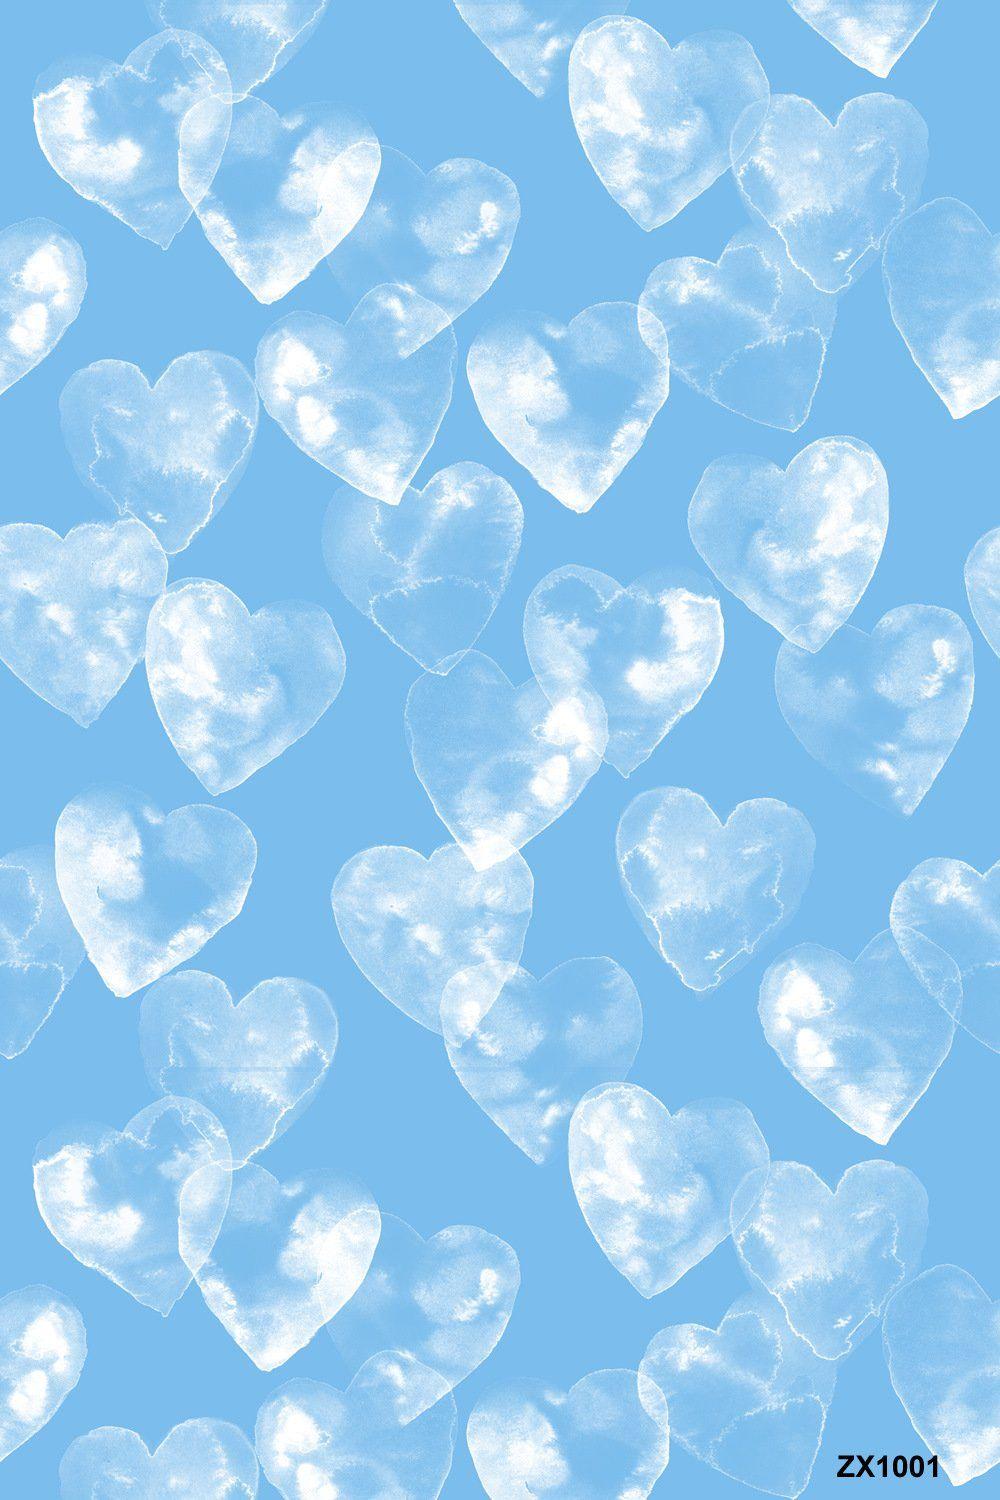 Blue Valentine iPhone Wallpapers - Top Free Blue Valentine iPhone ...